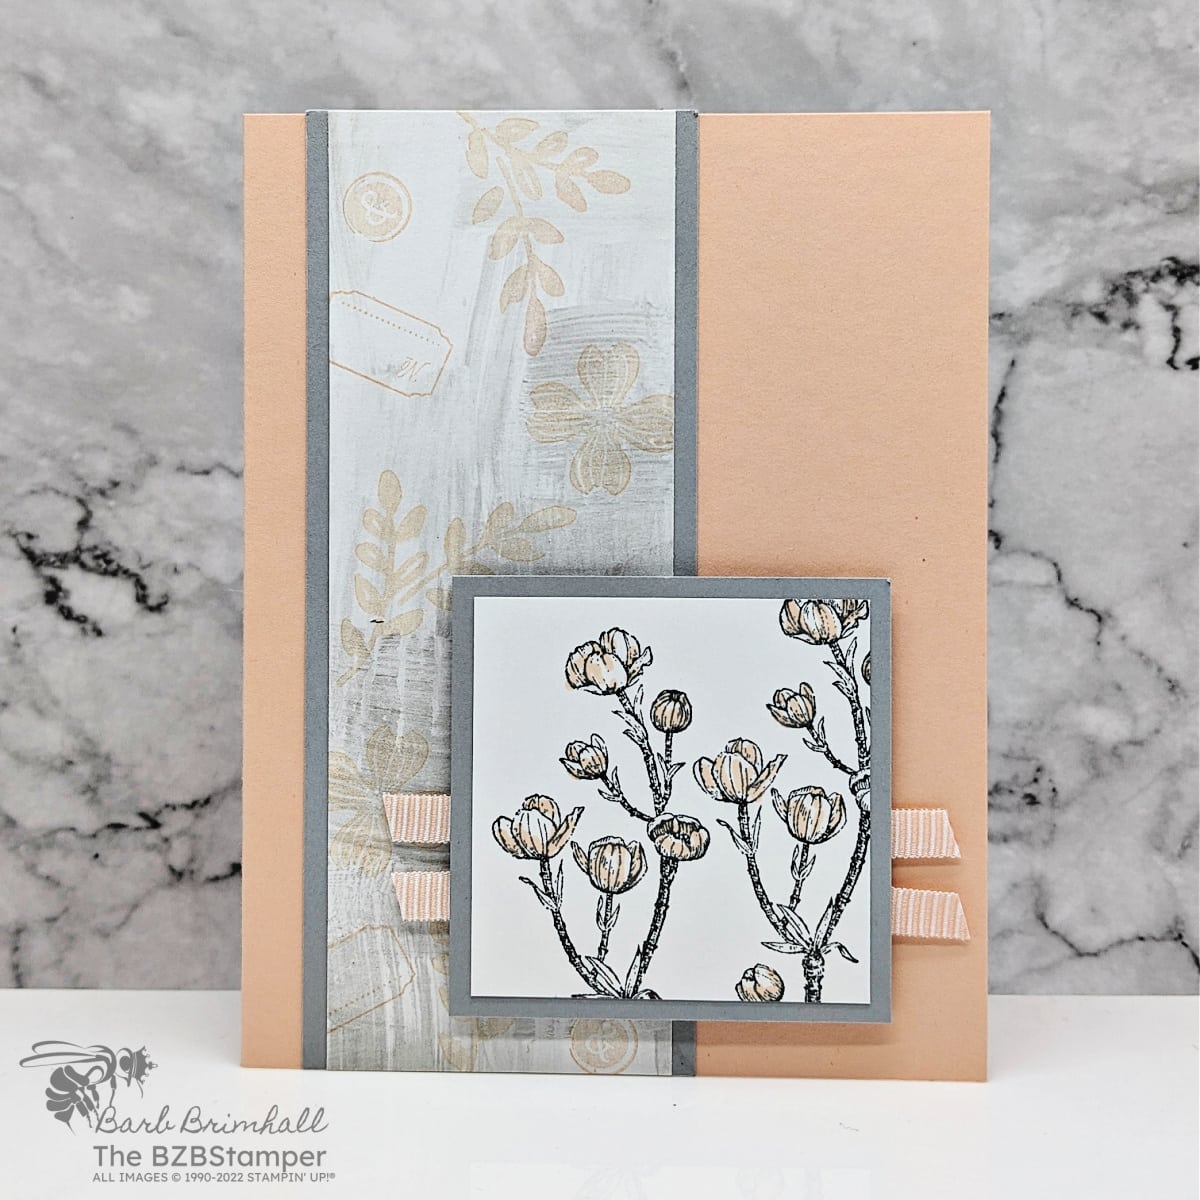 Elegant Yet Simple Handmade Dogwood Card in peach and gray.  No sentiment on the card.